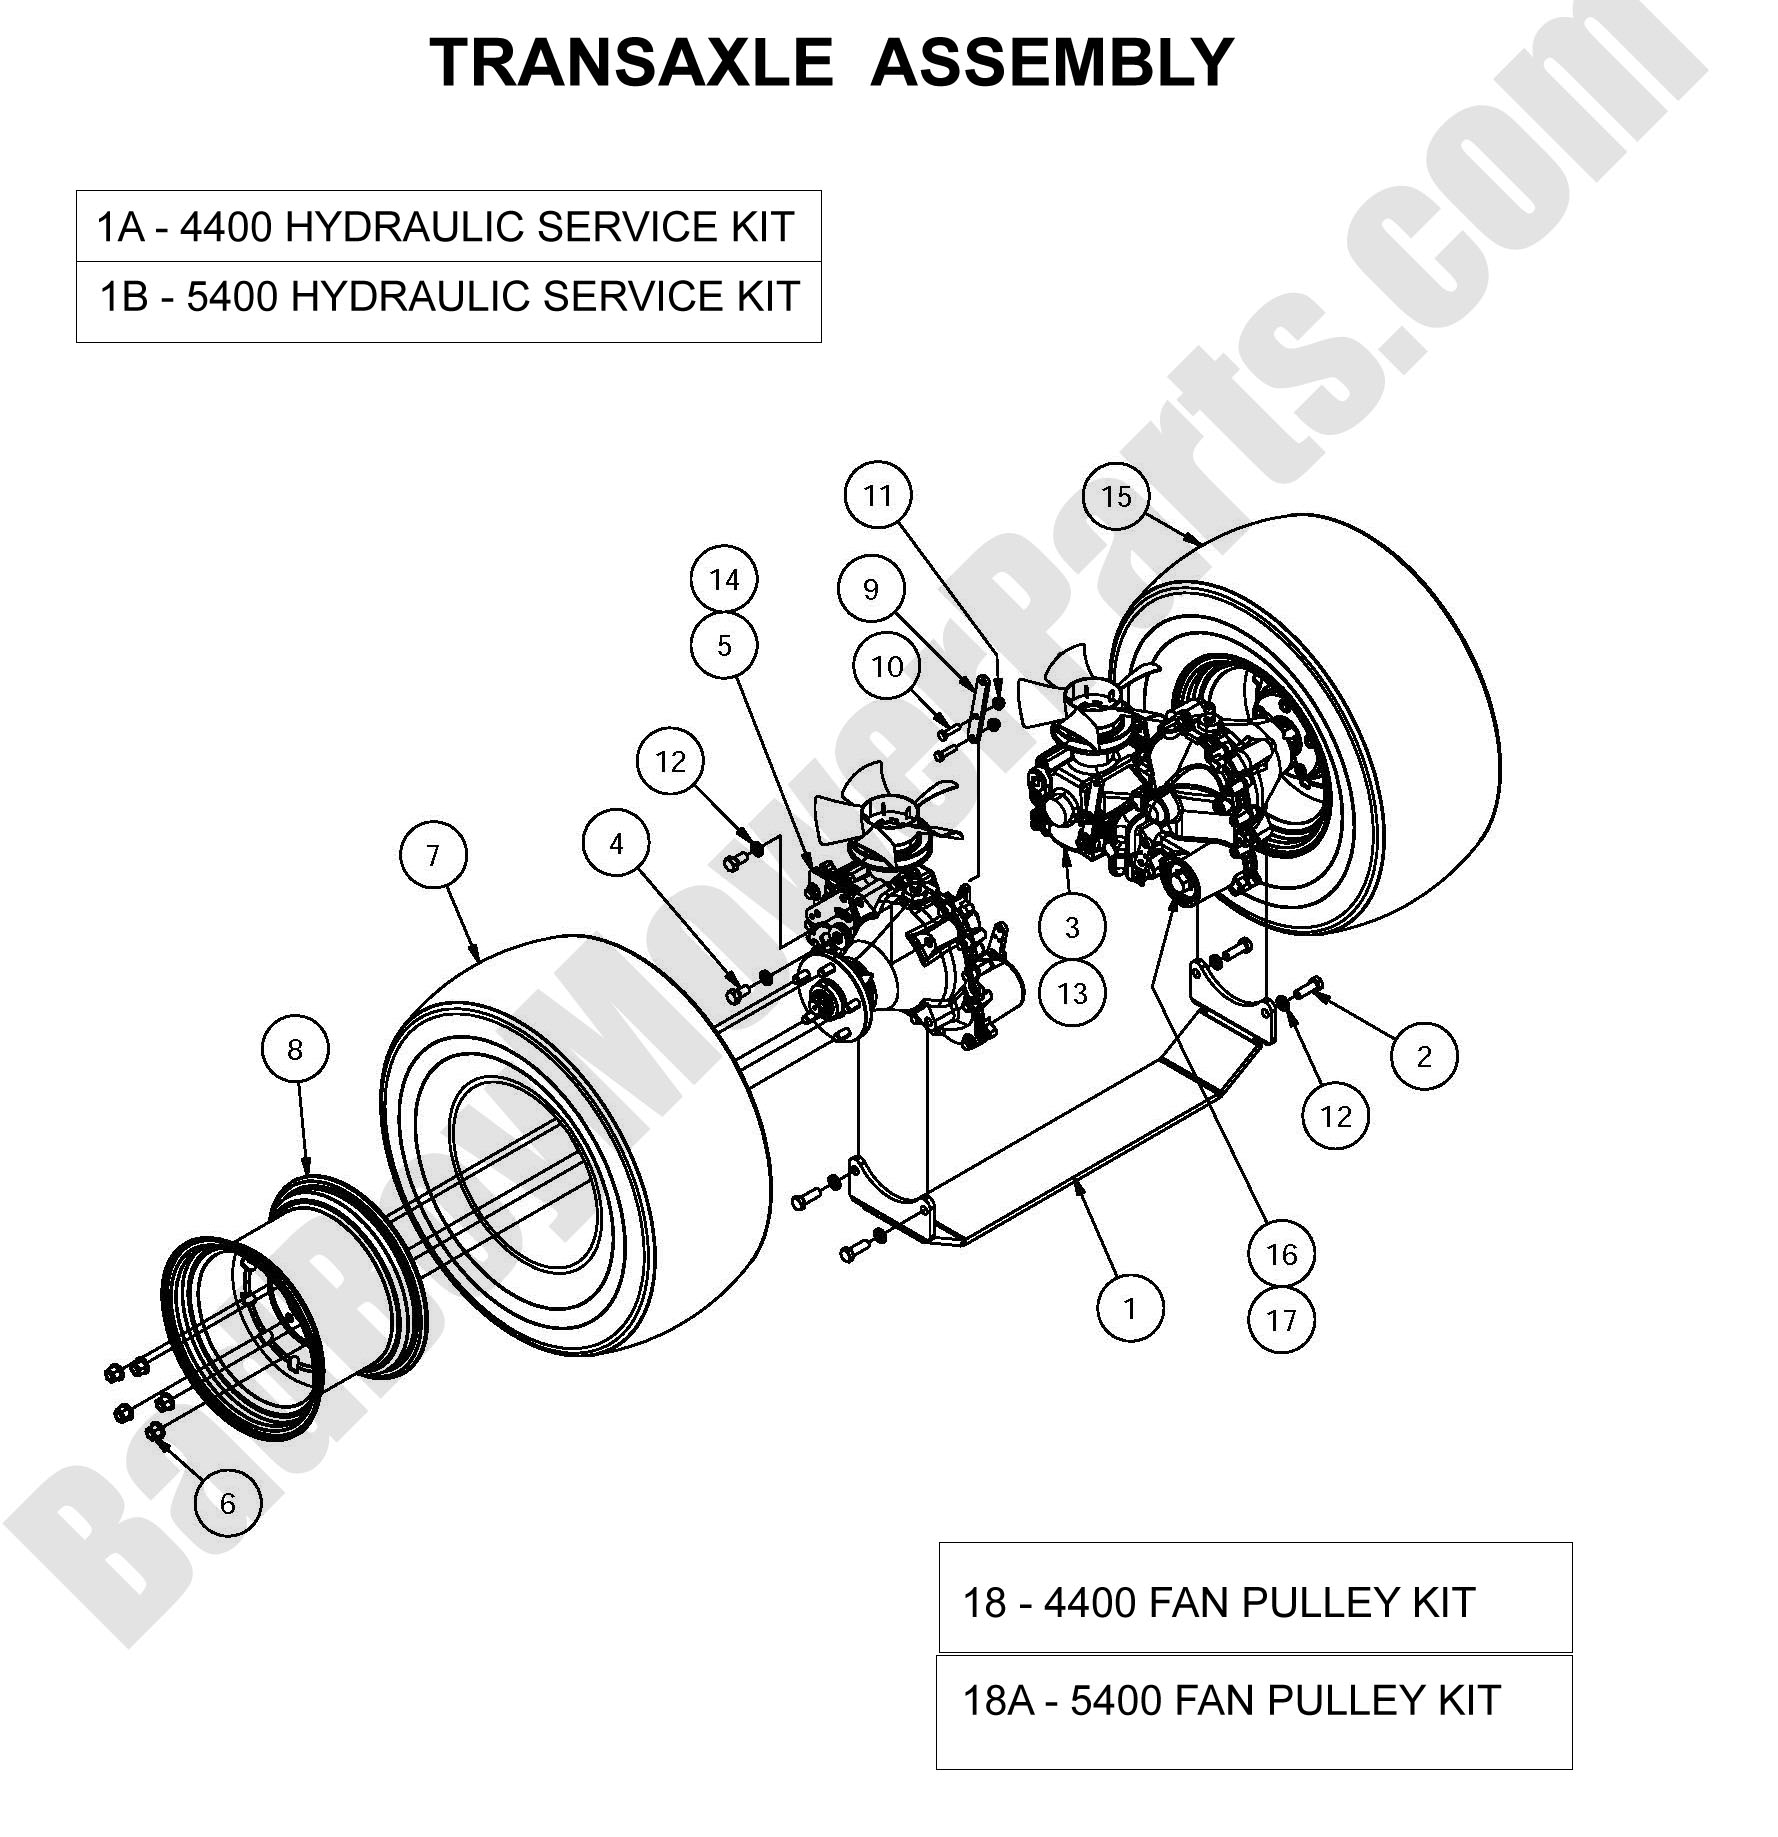 2016 Outlaw & Outlaw Extreme Transaxle Assembly